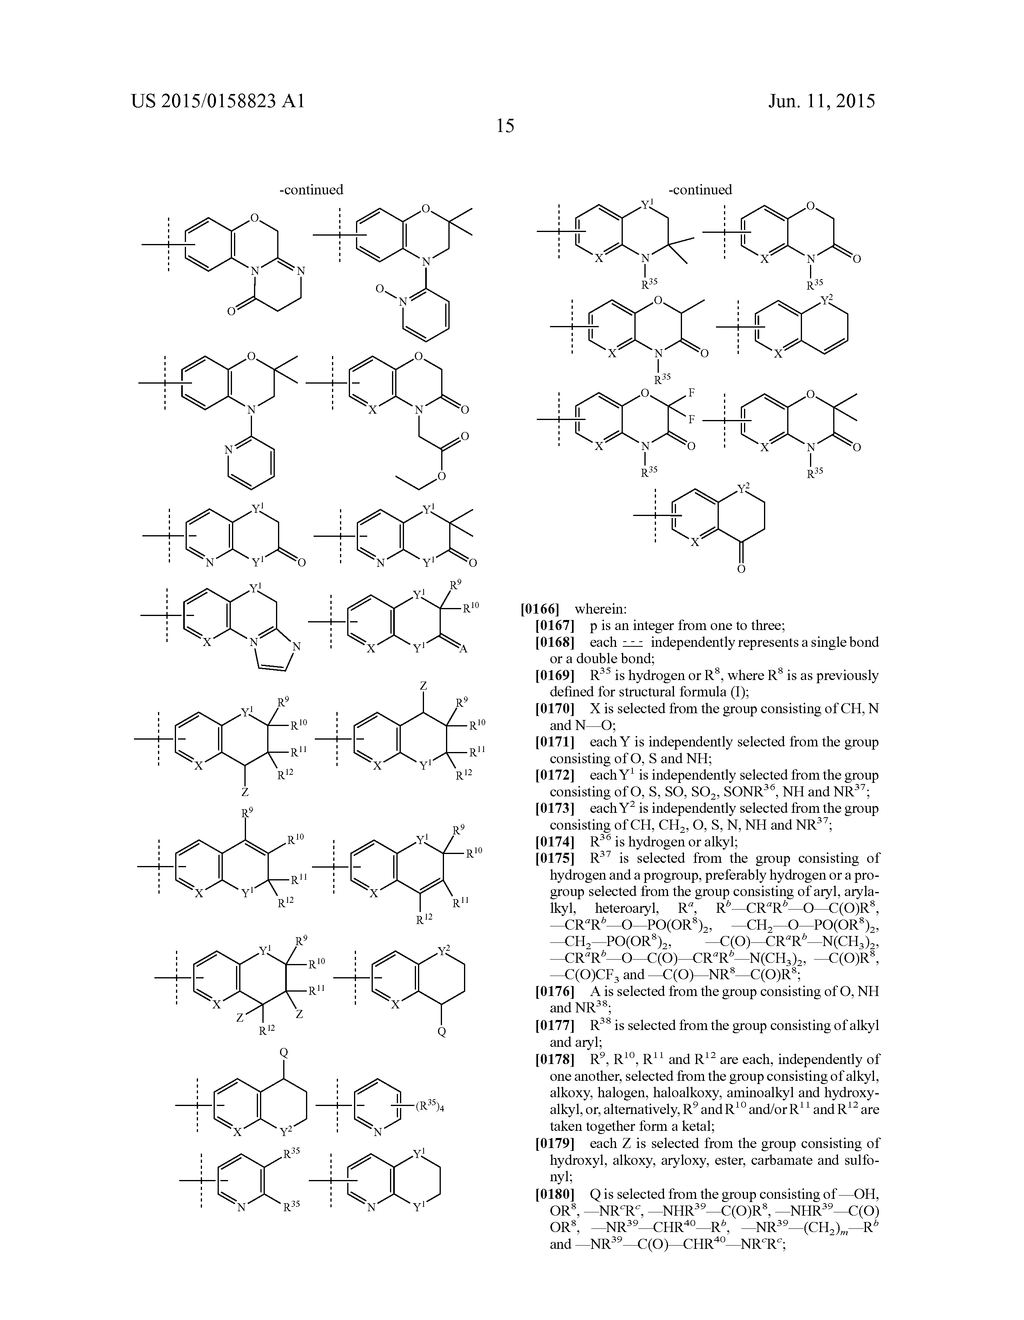 2,4-PYRIMIDINEDIAMINE COMPOUNDS AND THEIR USES - diagram, schematic, and image 30